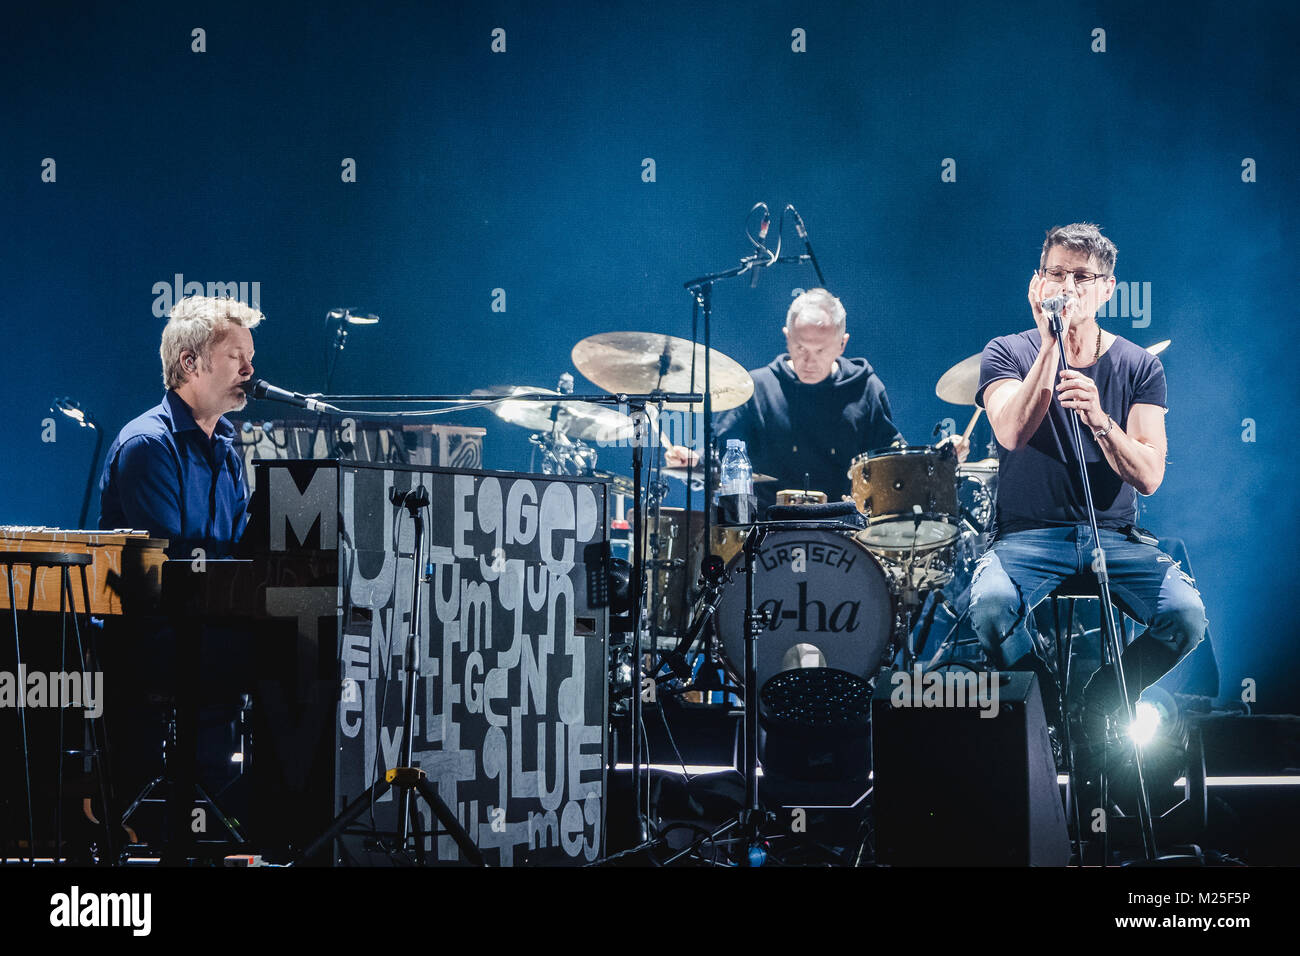 Zurich, Switzerland. 5th February, 2018. The Norwegian pop group a-ha  performs a live concert at Hallenstadion in Zürich as part of the a-ha MTV  Unplugged Tour 2018. Here singer and songwriter Morten